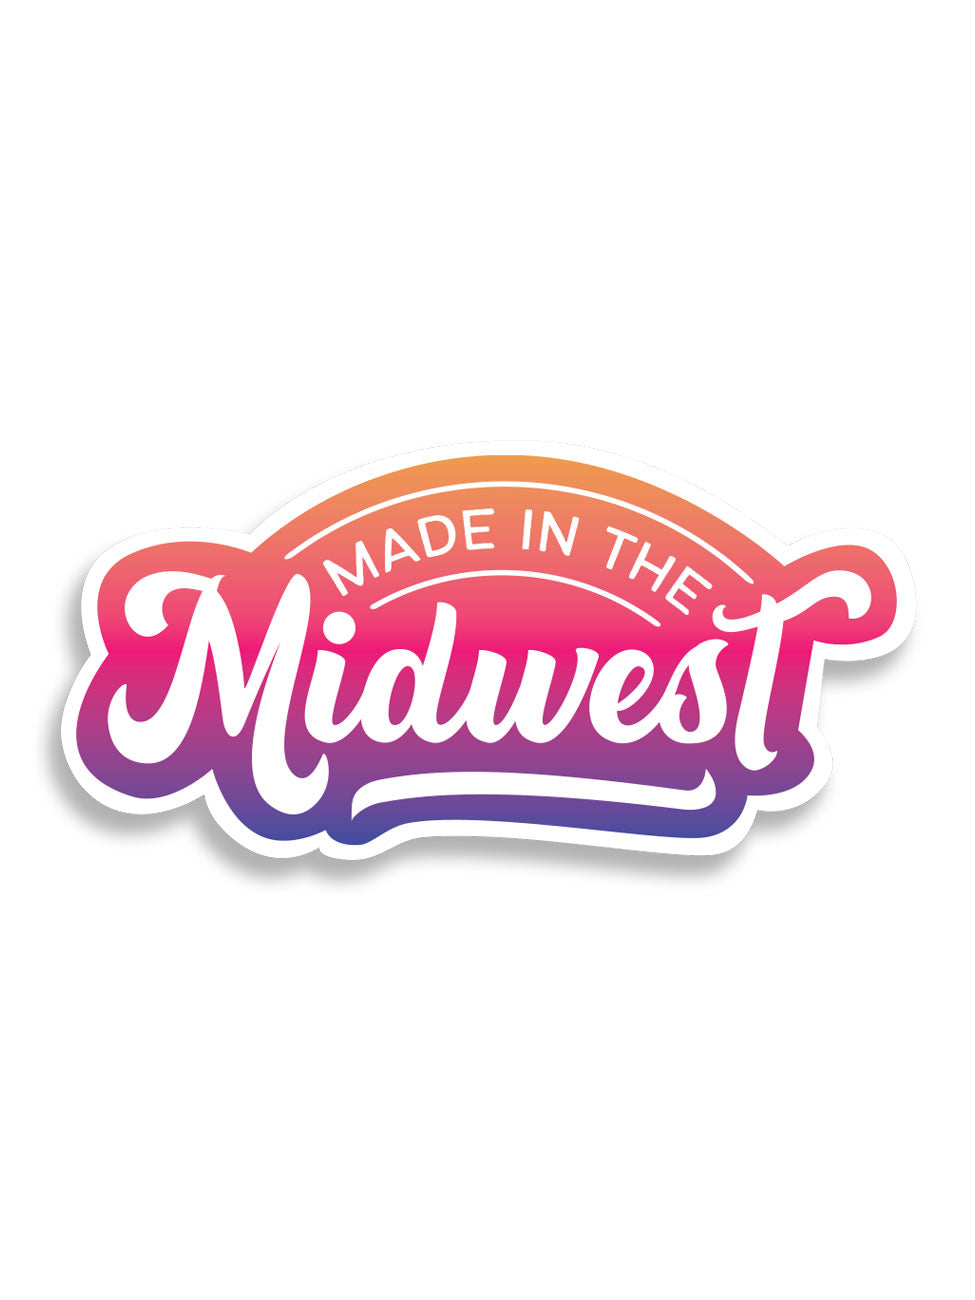 Made in the Midwest die cut sticker in sunset gradient